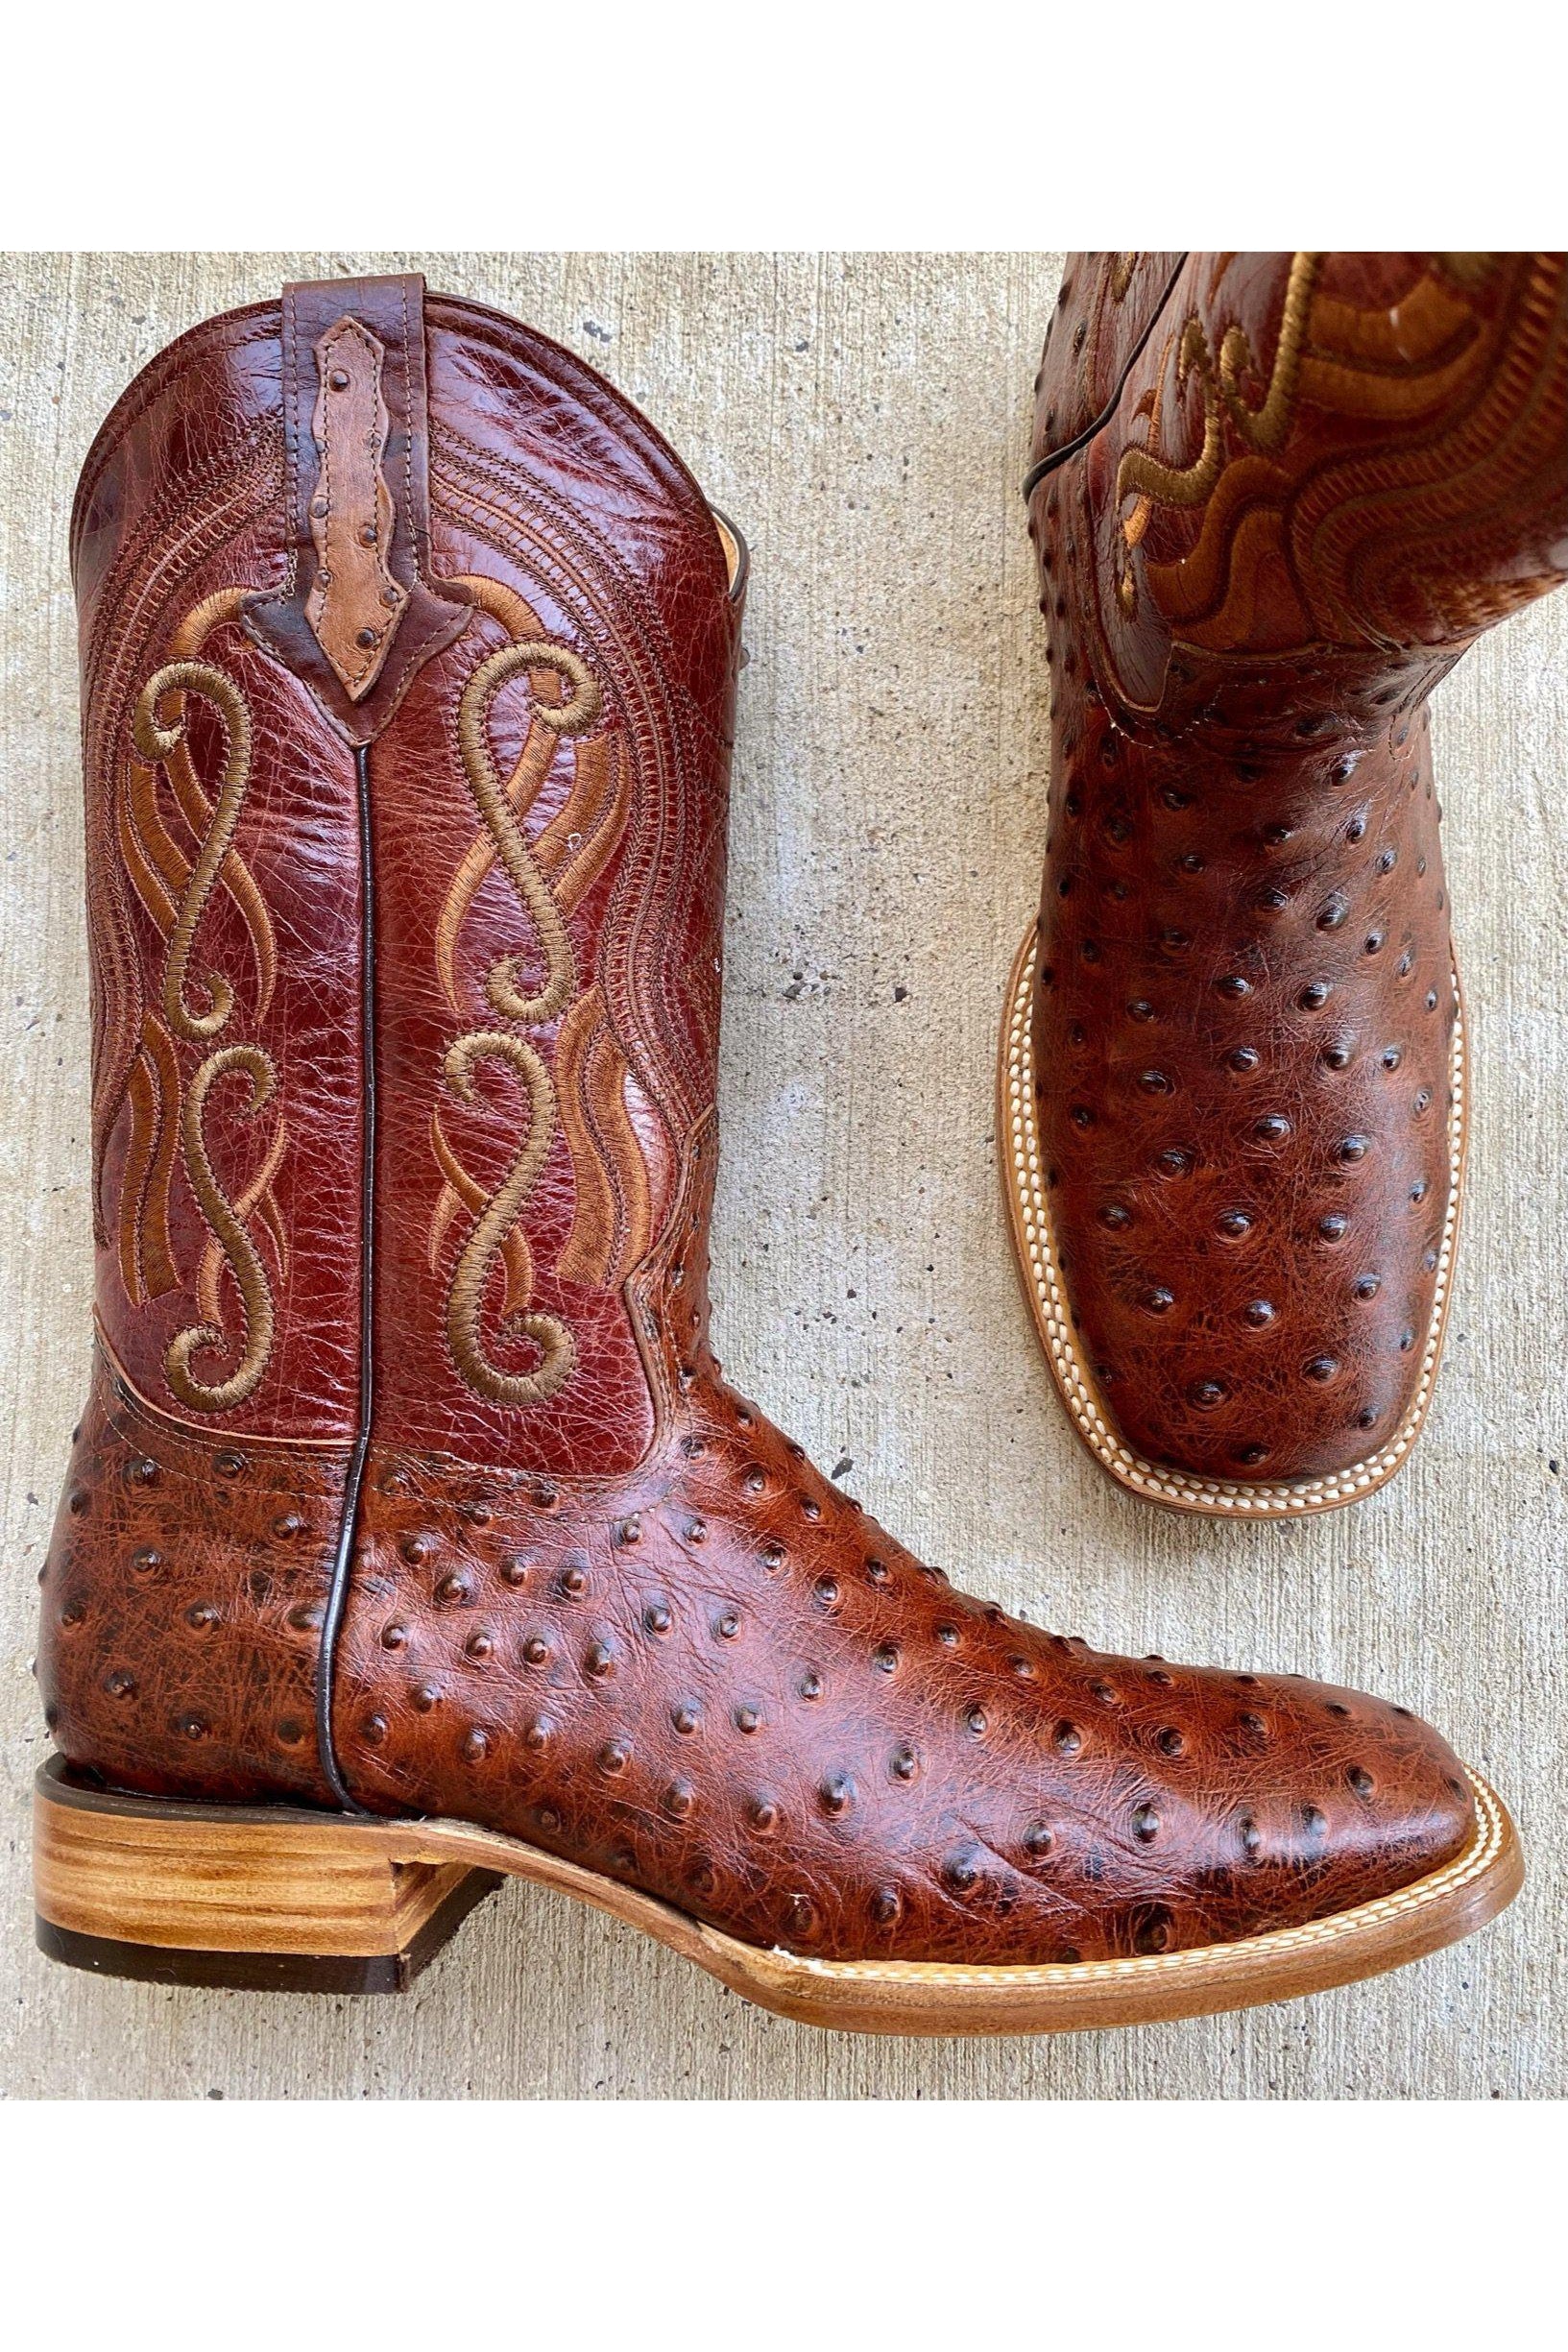 Cactus Exotic Men’s Red Ostrich Boots Square Toe